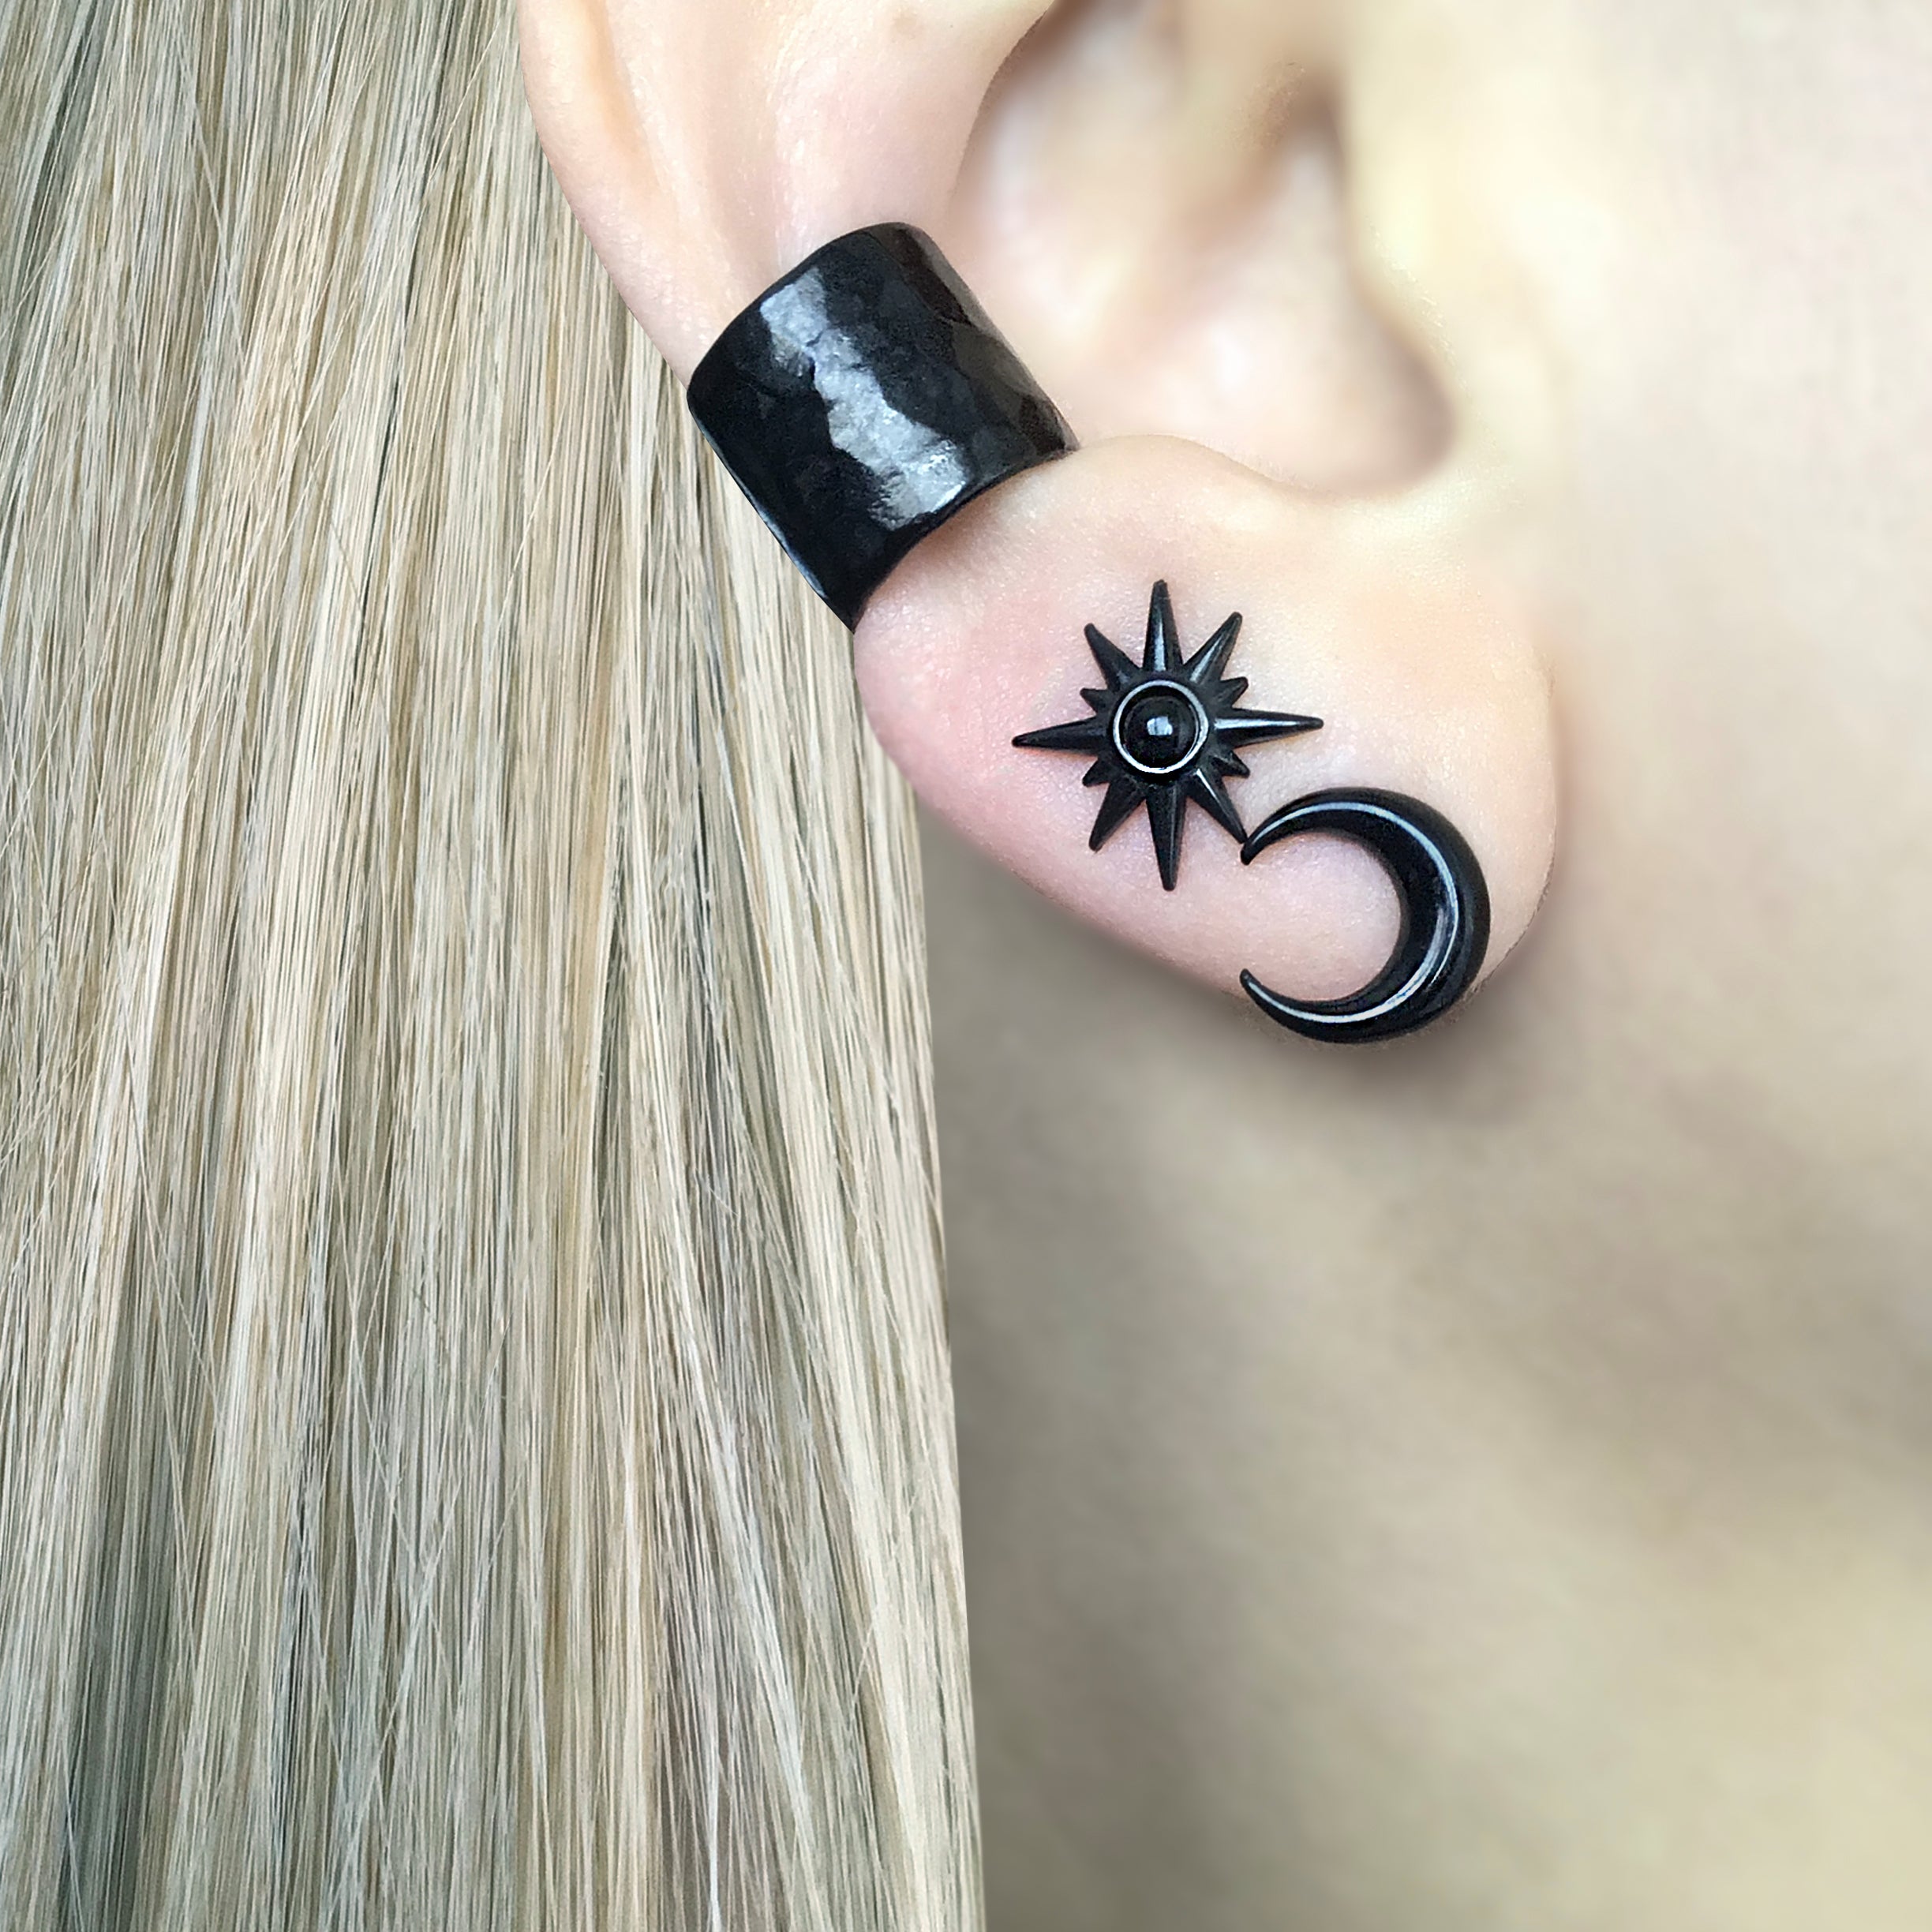 MOON AND STAR MISMATCHED STUDS IN BLACK